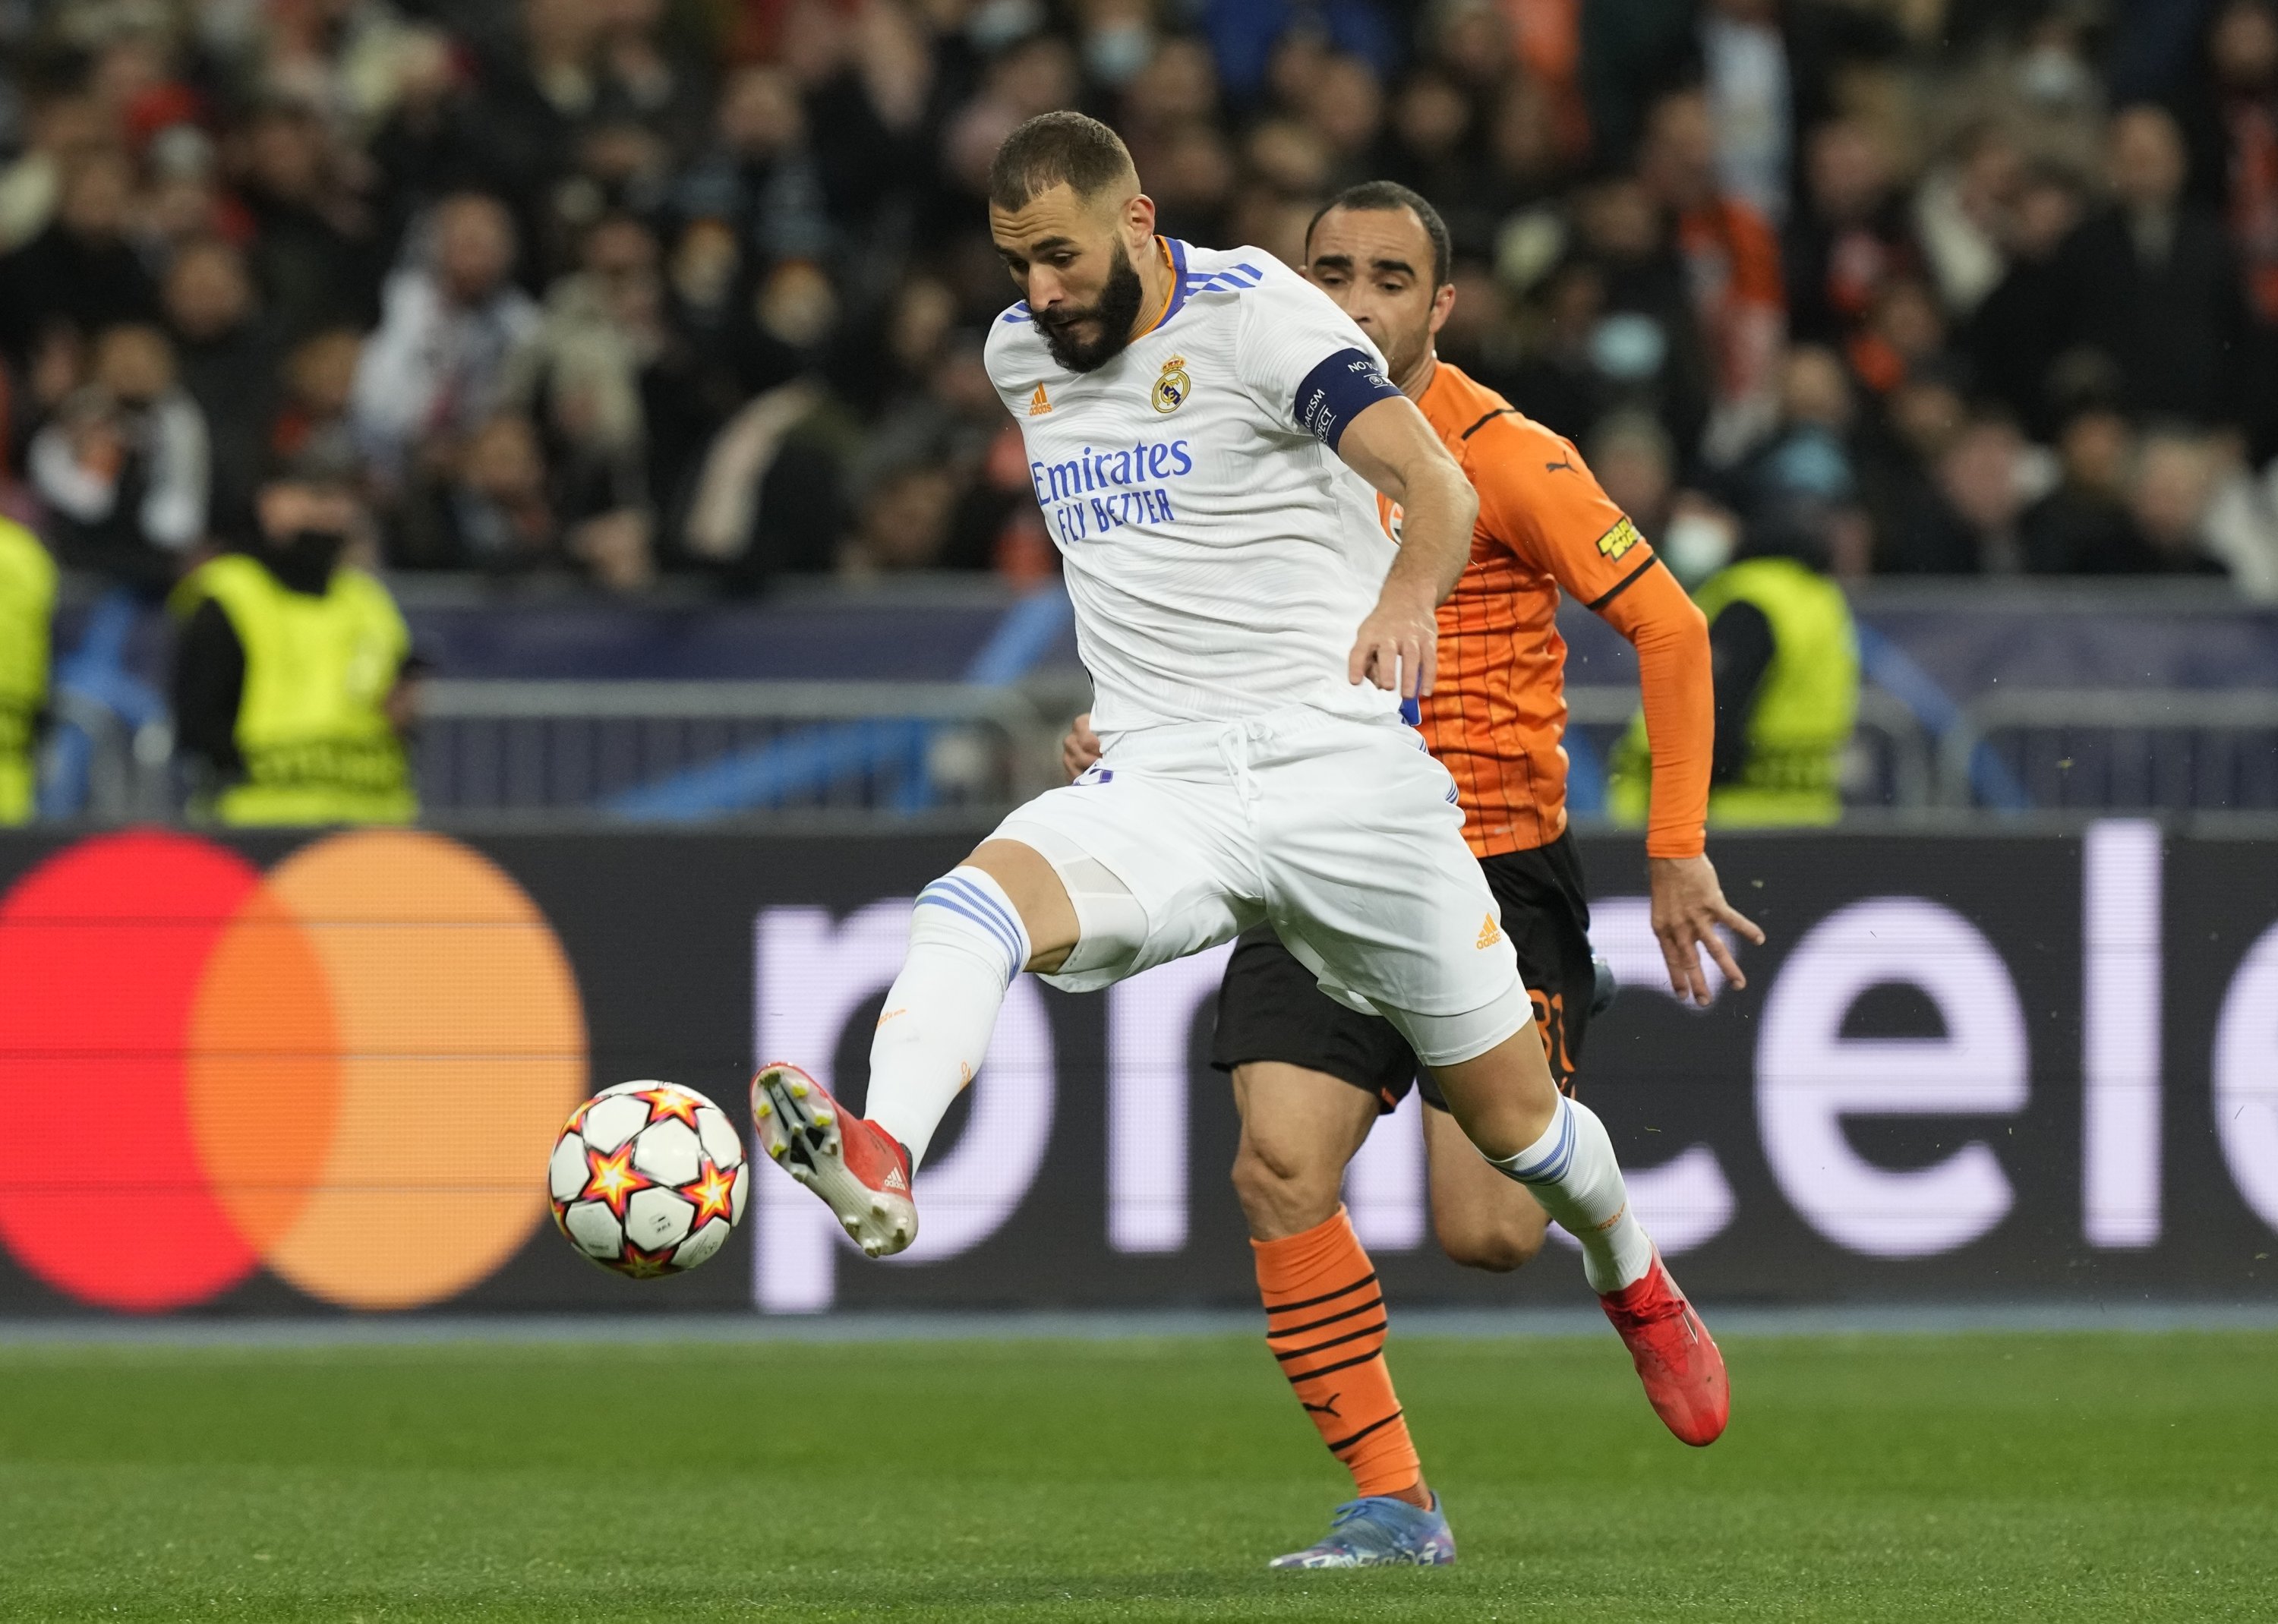 Real Madrid's Karim Benzema controls the ball during the Champions League match against Shakhtar Donetsk at the Olympiyskiy stadium in Kyiv, Ukraine, Oct. 19, 2021. (AP Photo)